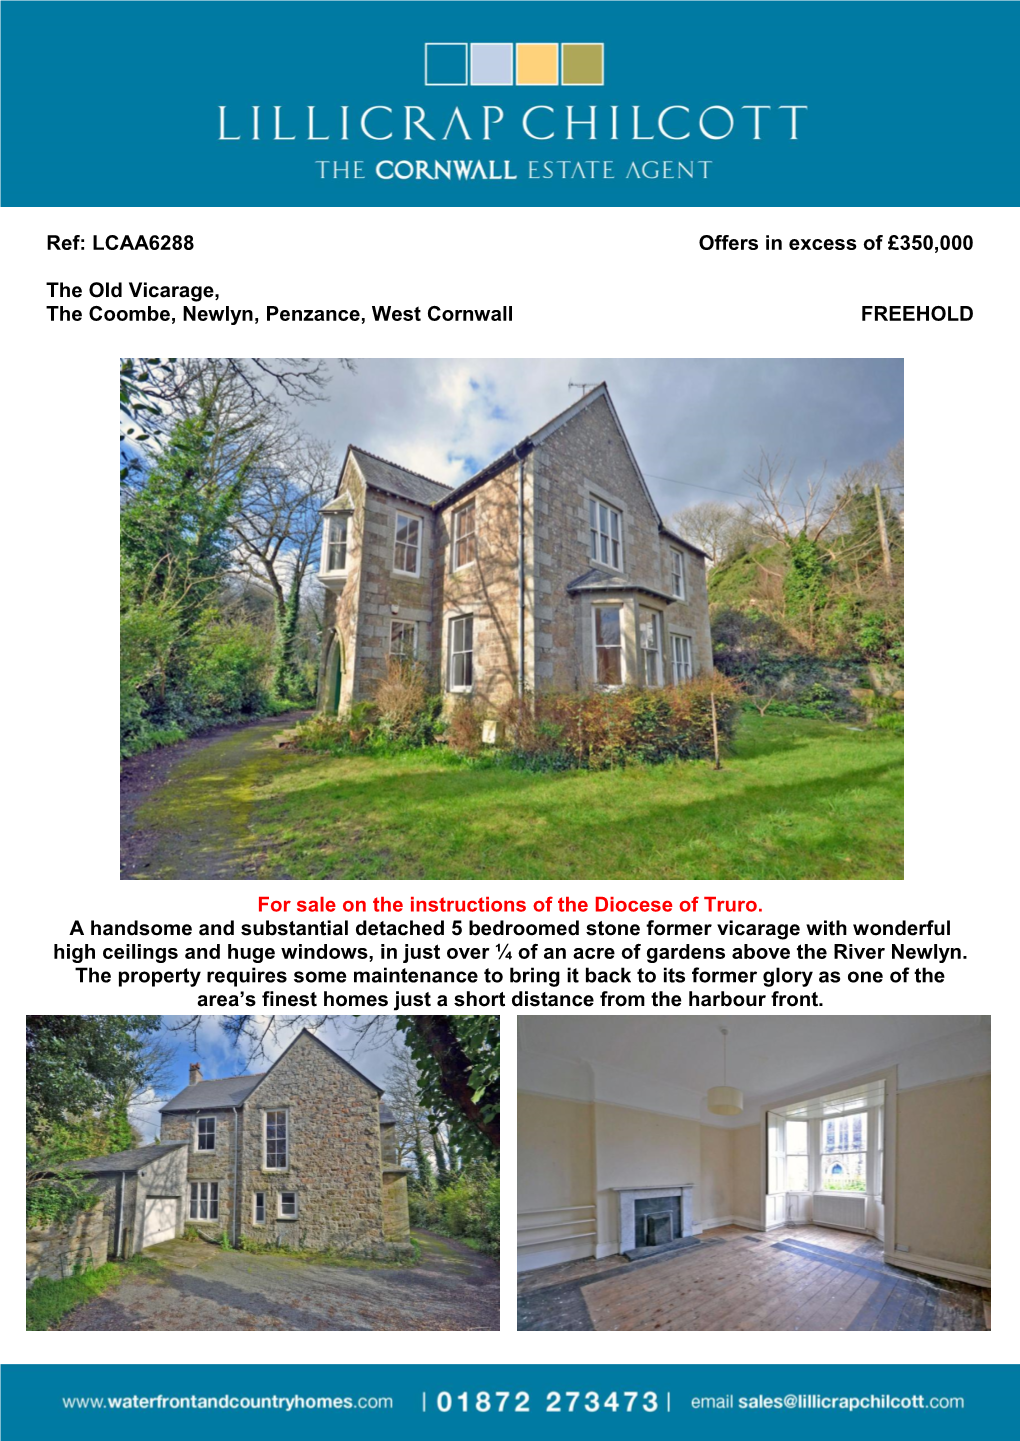 Ref: LCAA6288 Offers in Excess of £350000 the Old Vicarage, The